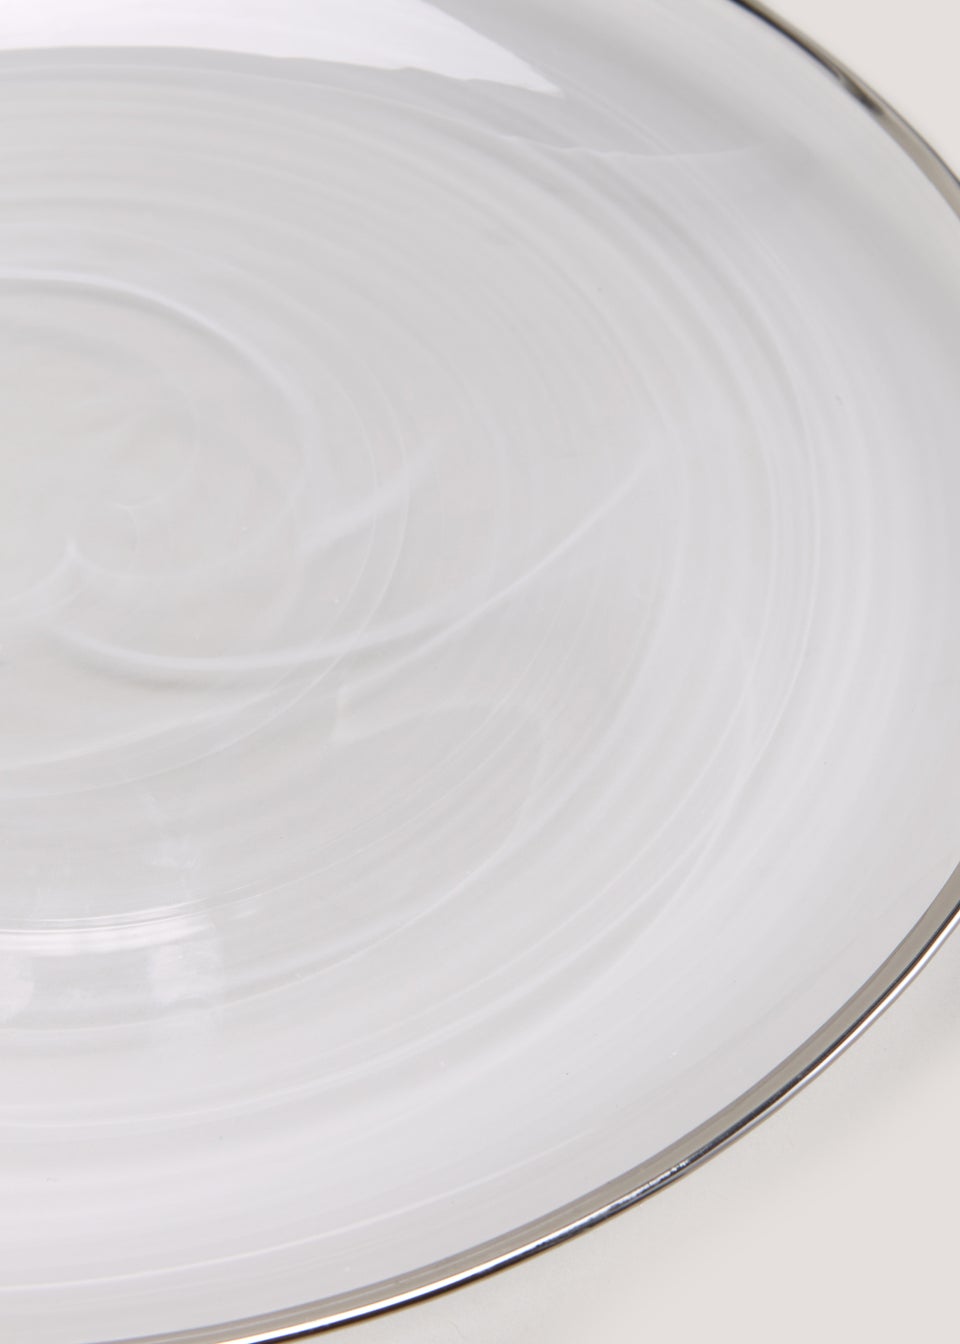 Silver Rim Charger Plate (31cm)